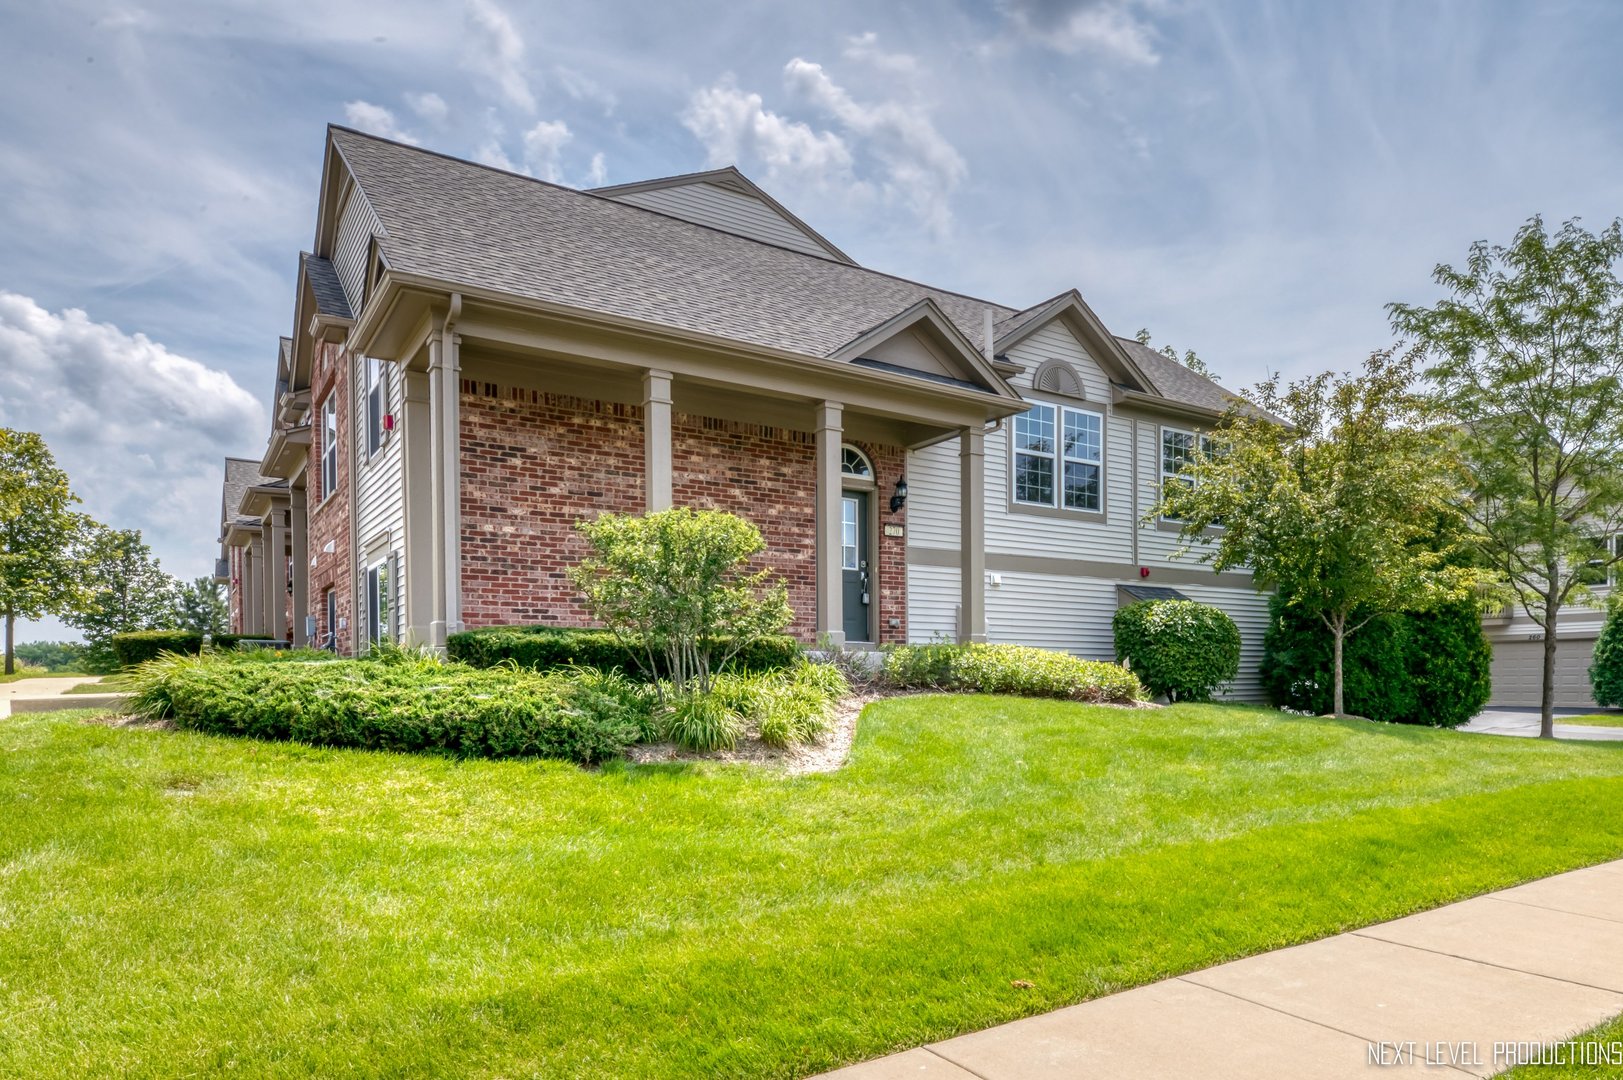 Oswego IL Homes for Sale Oswego Real Estate Bowers Realty Group